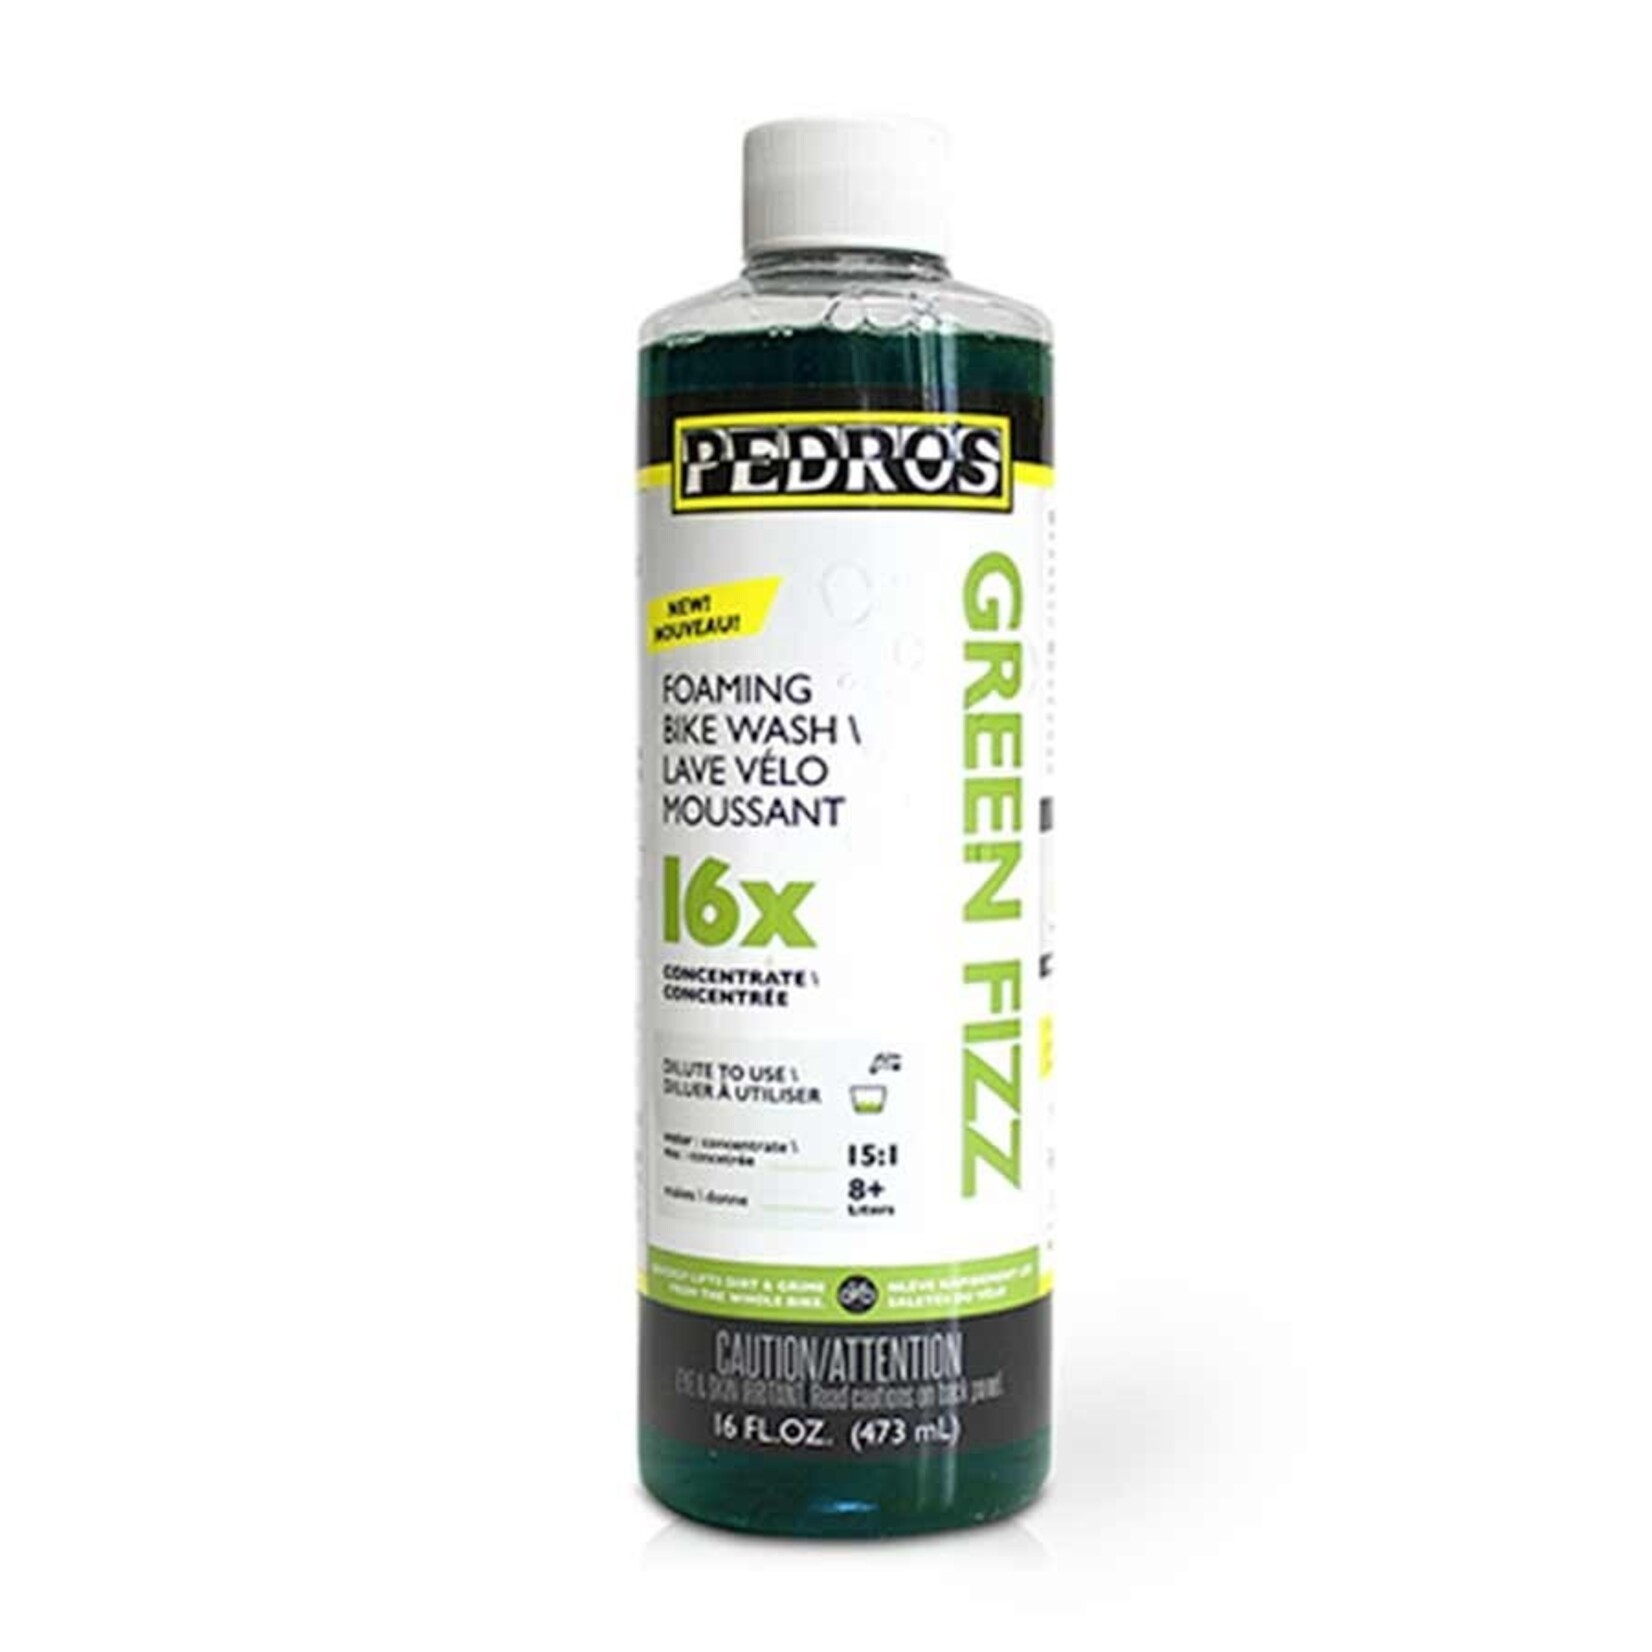 Pedros, Green Fizz 16X, Concentrated bike wash, 16oz/ 475ml